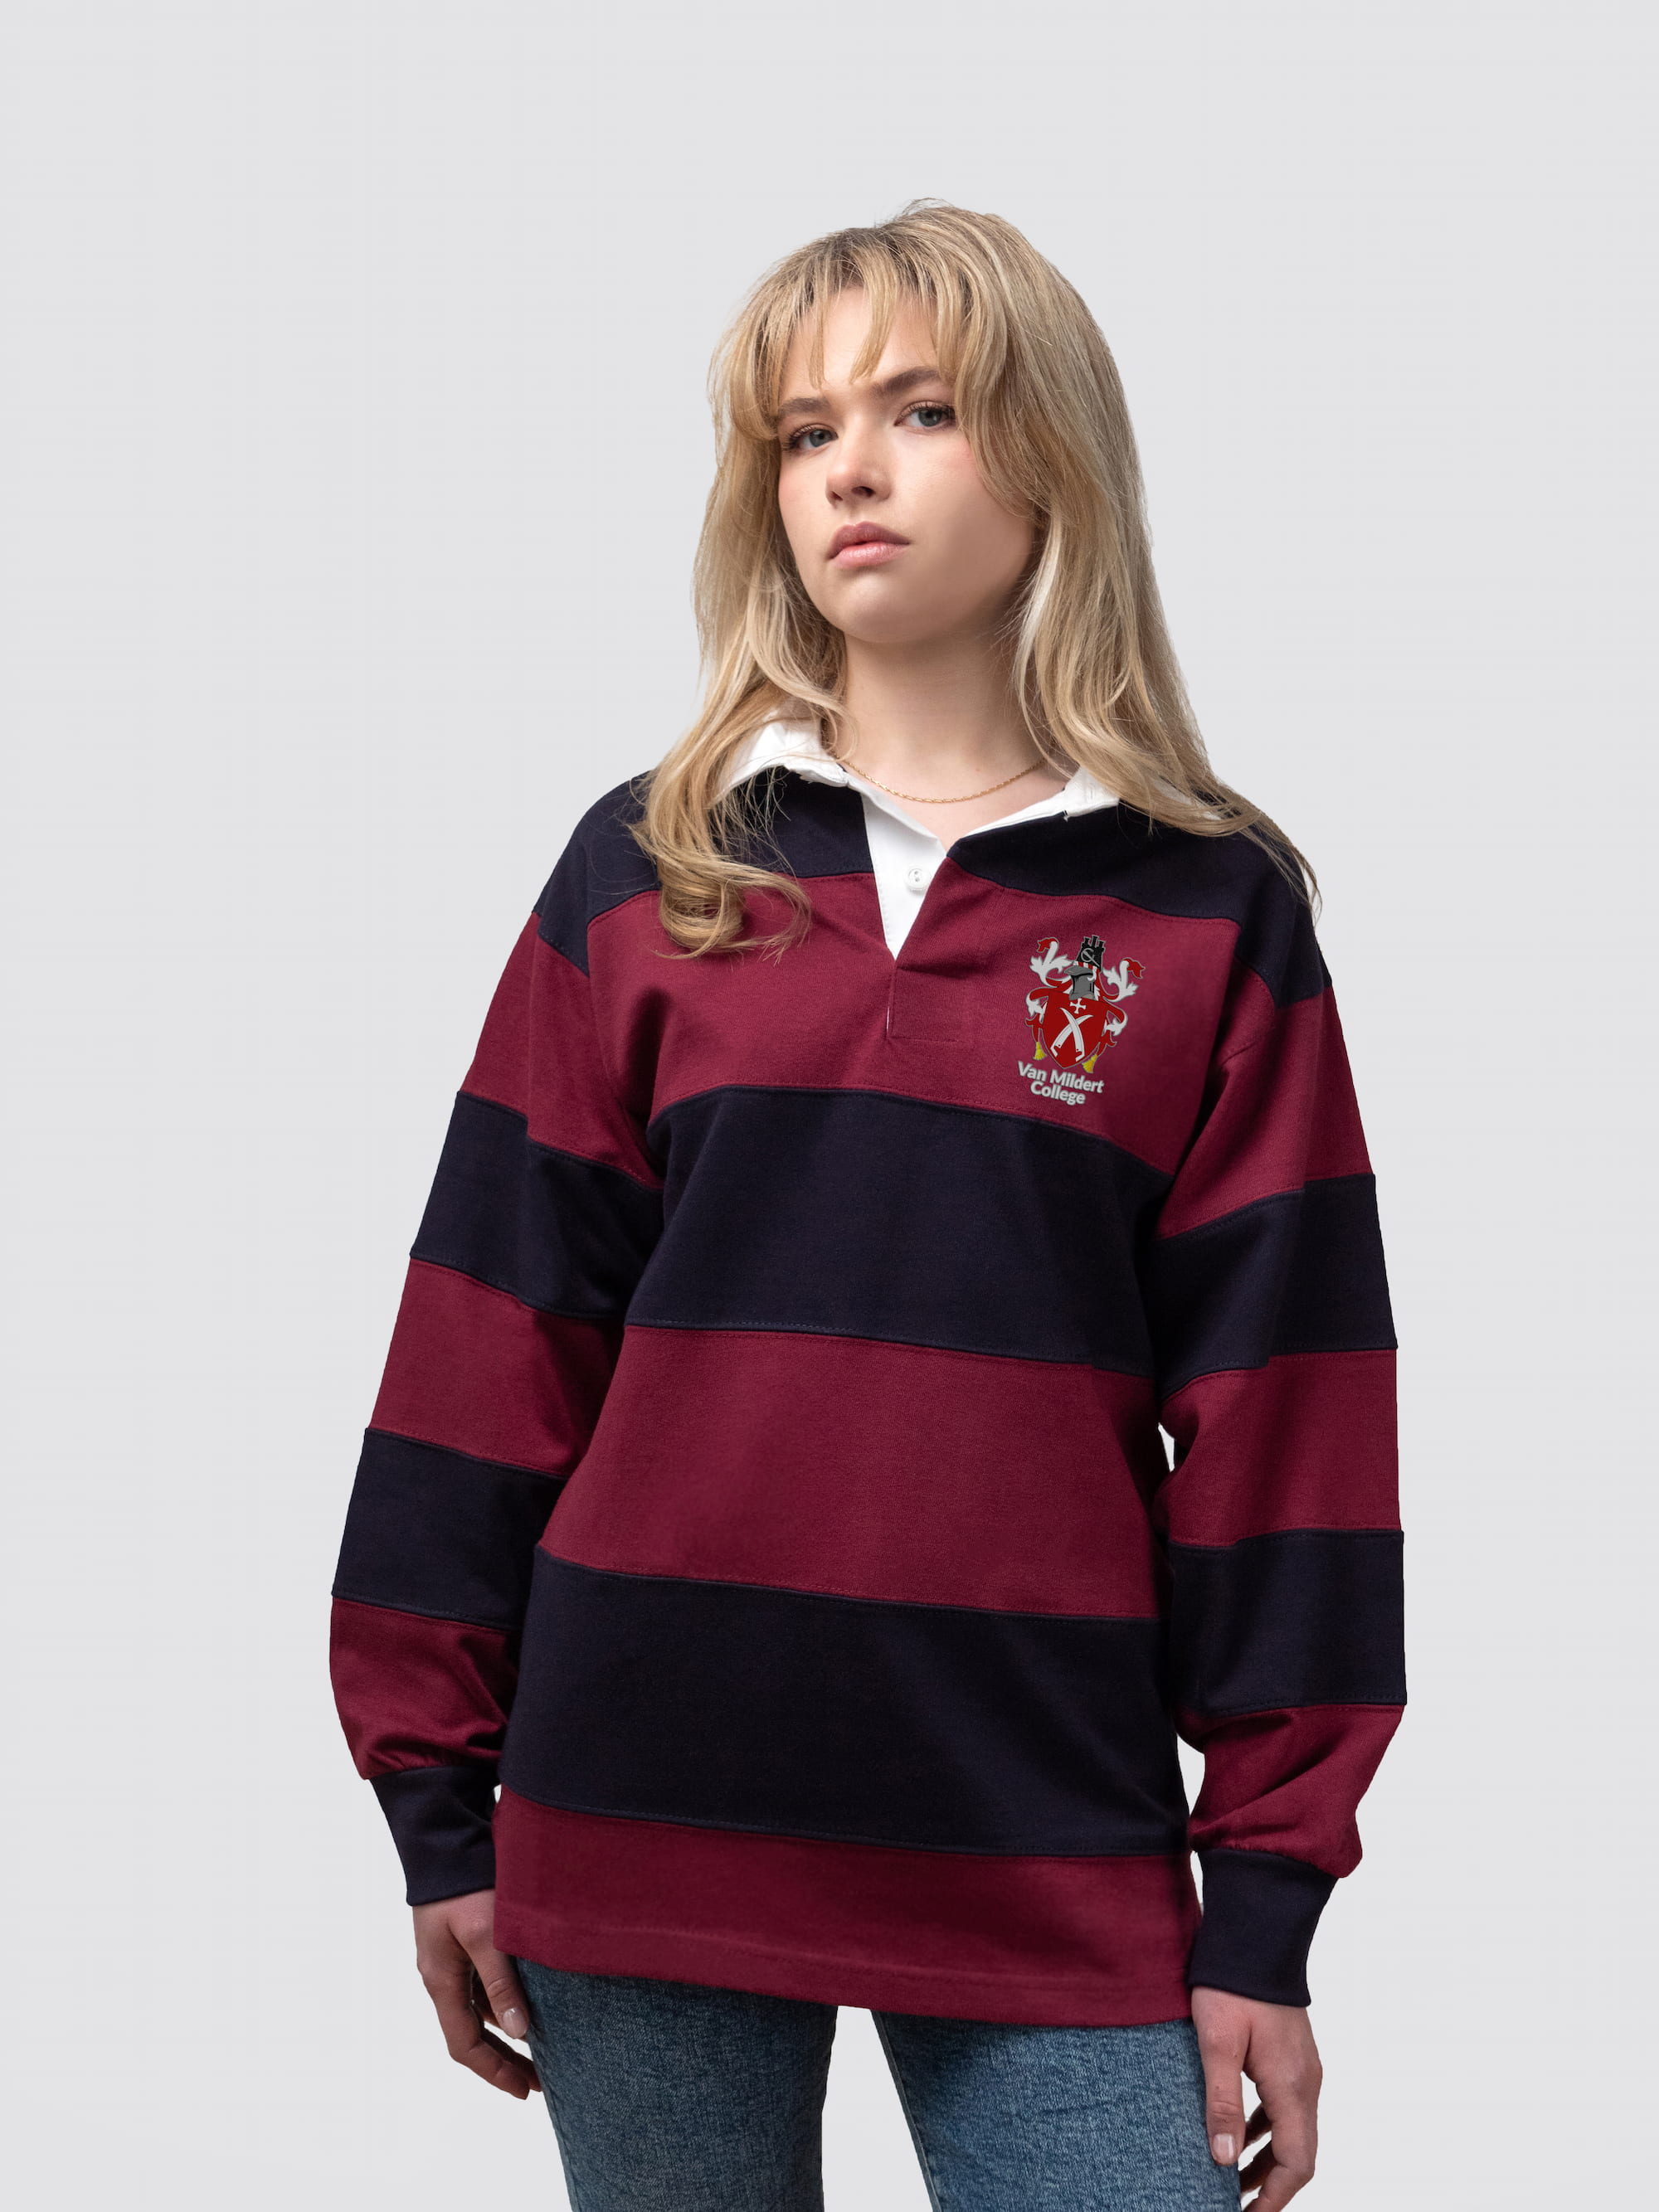 Van Mildert College rugby shirt, with burgundy and navy stripes